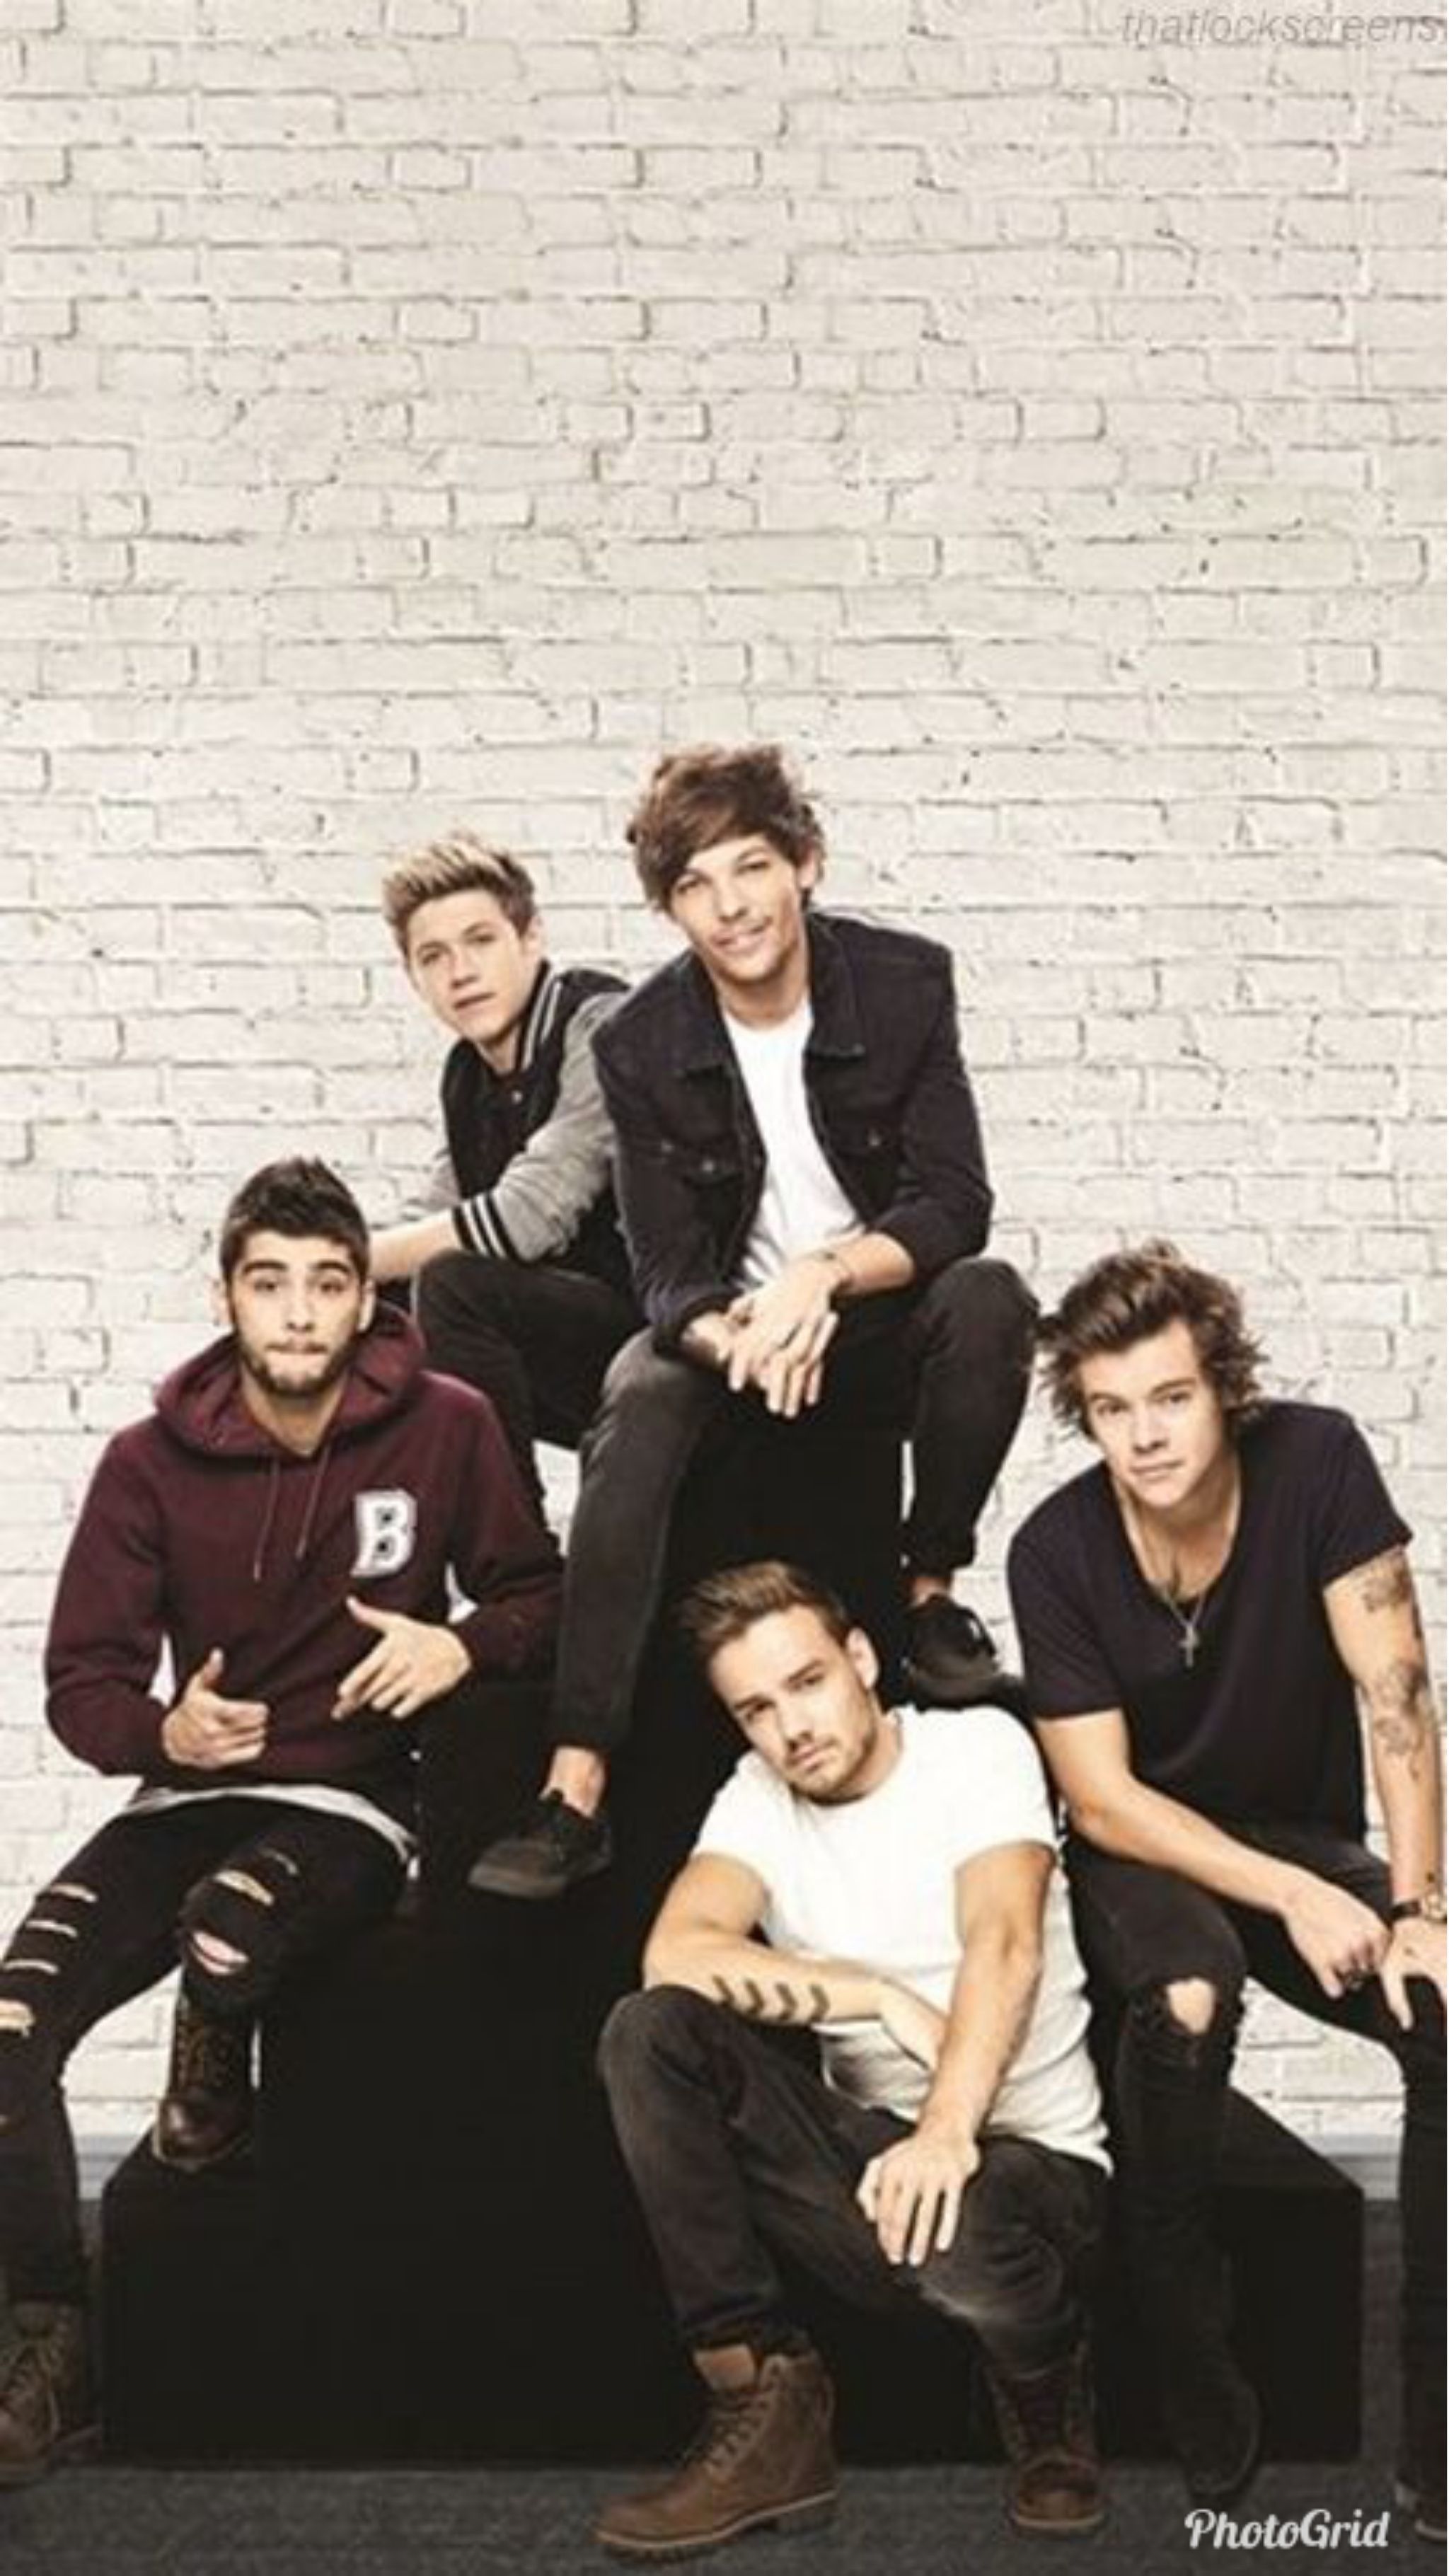 One Direction members sitting on a bench in front of a brick wall - One Direction